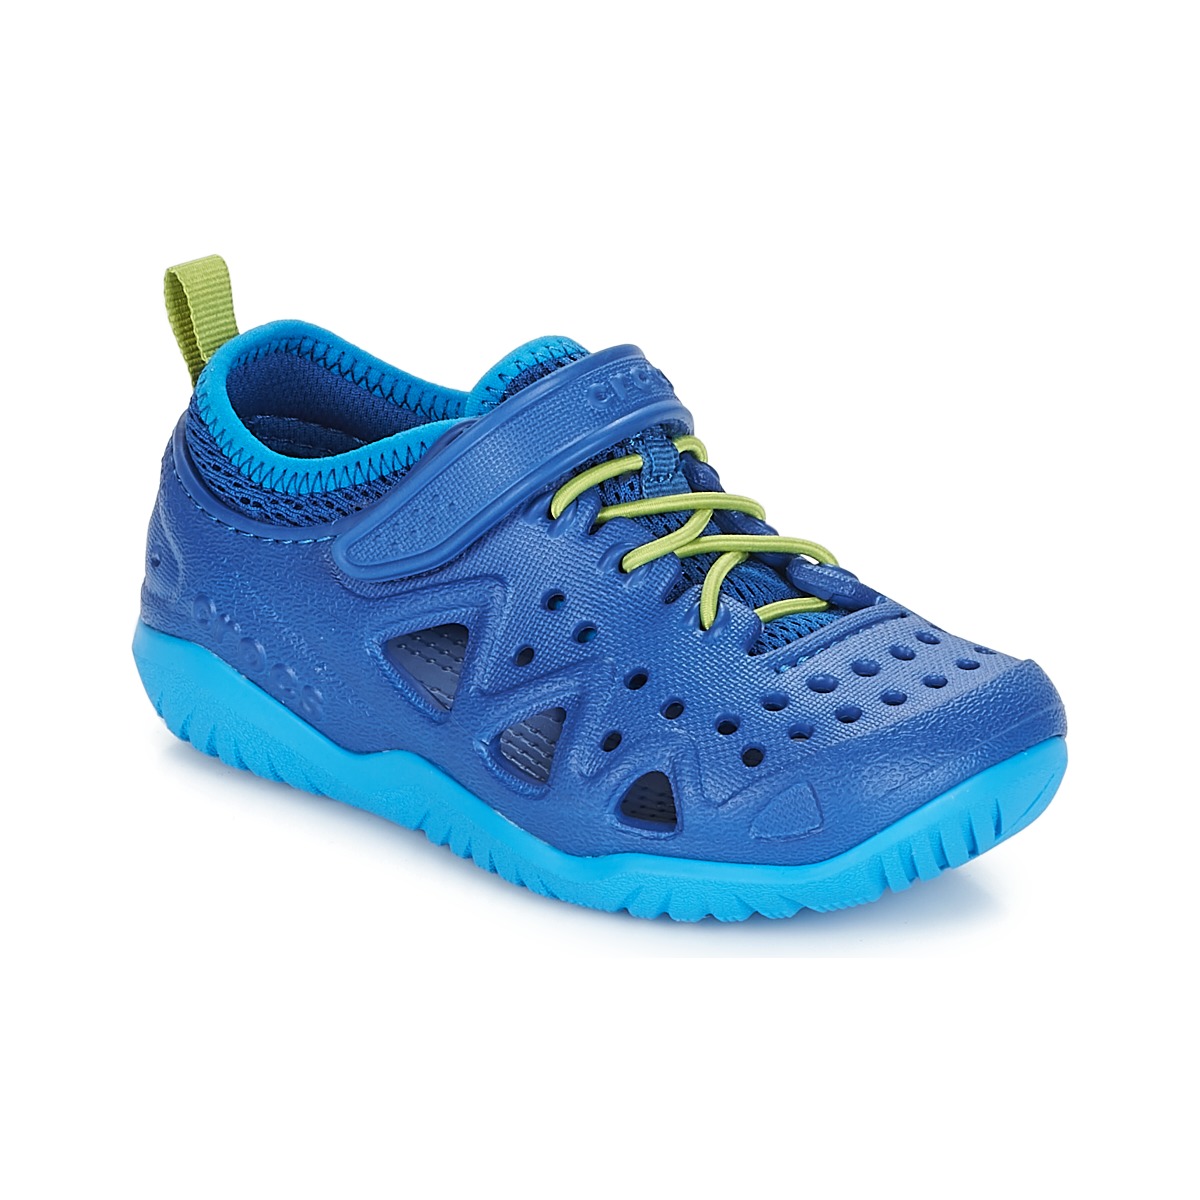 crocs swiftwater play shoes